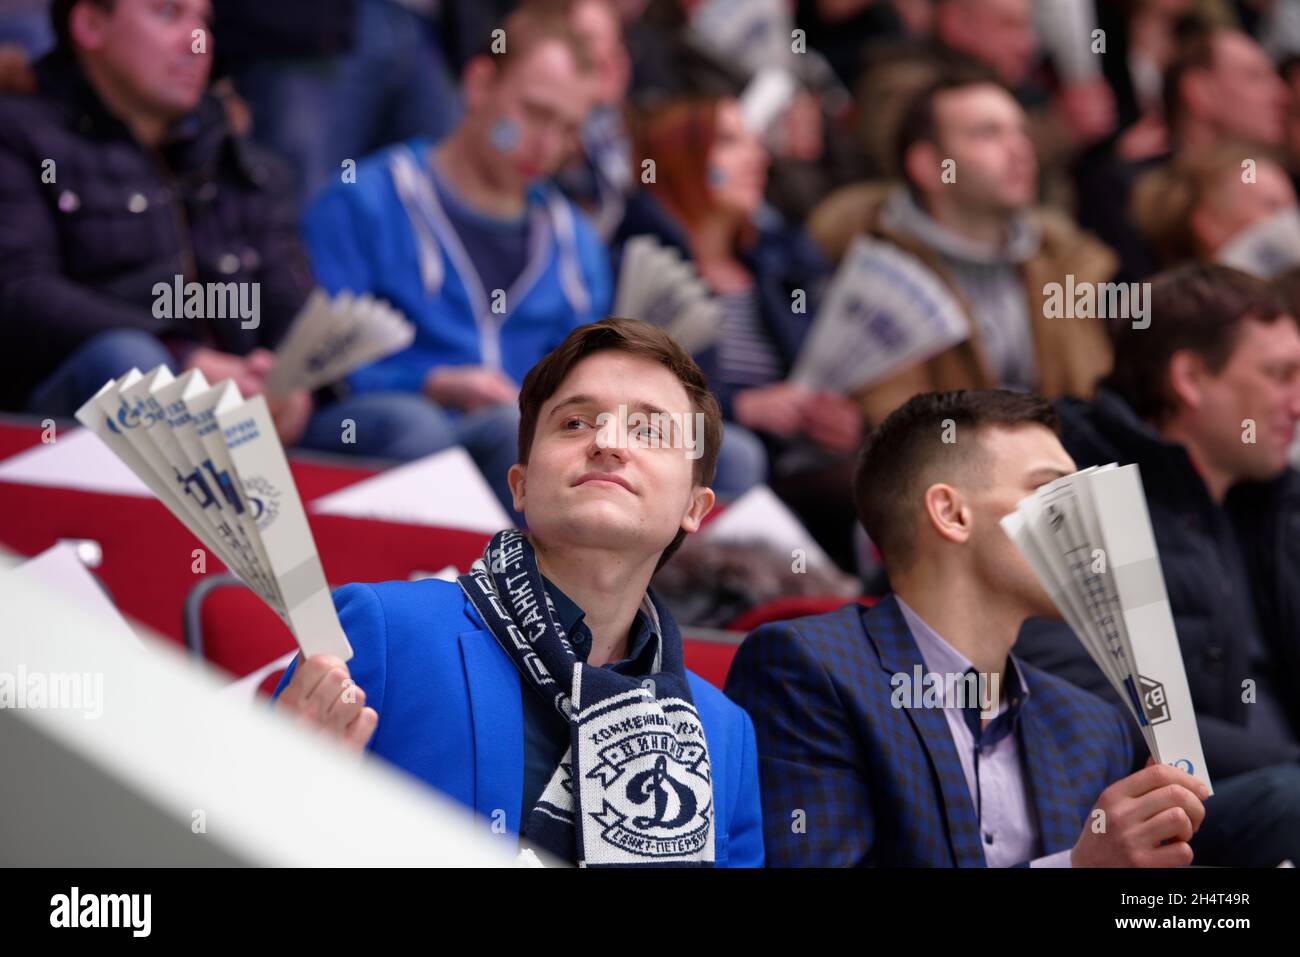 St. Petersburg, Russia, 20th March, 2018: Supporters of Ice Hockey Club Dinamo Saint-Petersburg during the match against Metallurg, Novokuznetsk Stock Photo